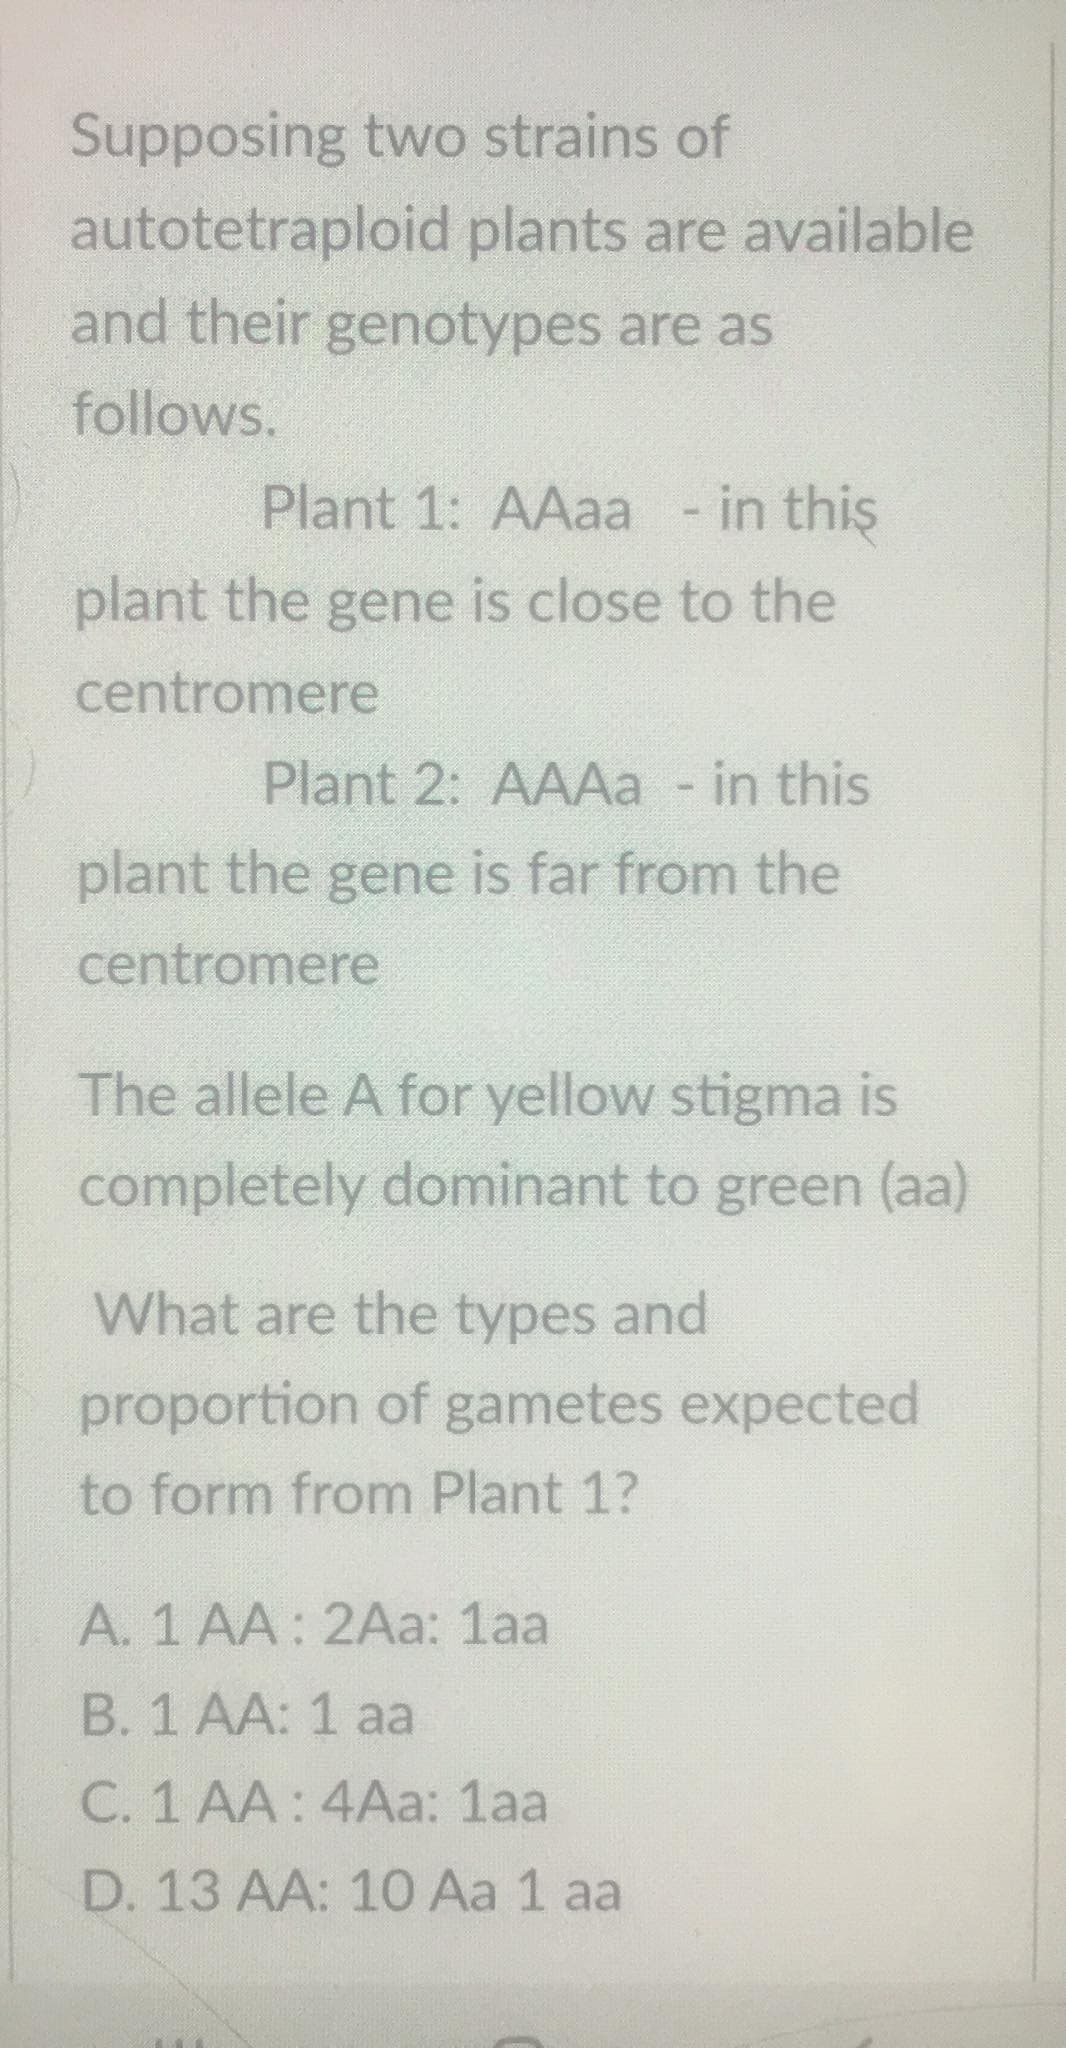 Supposing two strains of
autotetraploid plants are available
and their genotypes are as
follows.
Plant 1: AAaa - in this
plant the gene is close to the
centromere
Plant 2: AAAa - in this
plant the gene is far from the
centromere
The allele A for yellow stigma is
completely dominant to green (aa)
What are the types and
proportion of gametes expected
to form from Plant 1?
A. 1 AA: 2Aa: 1aa
B. 1 AA: 1 aa
C. 1 AA: 4Aa: 1aa
D. 13 AA: 10 Aa 1 aa